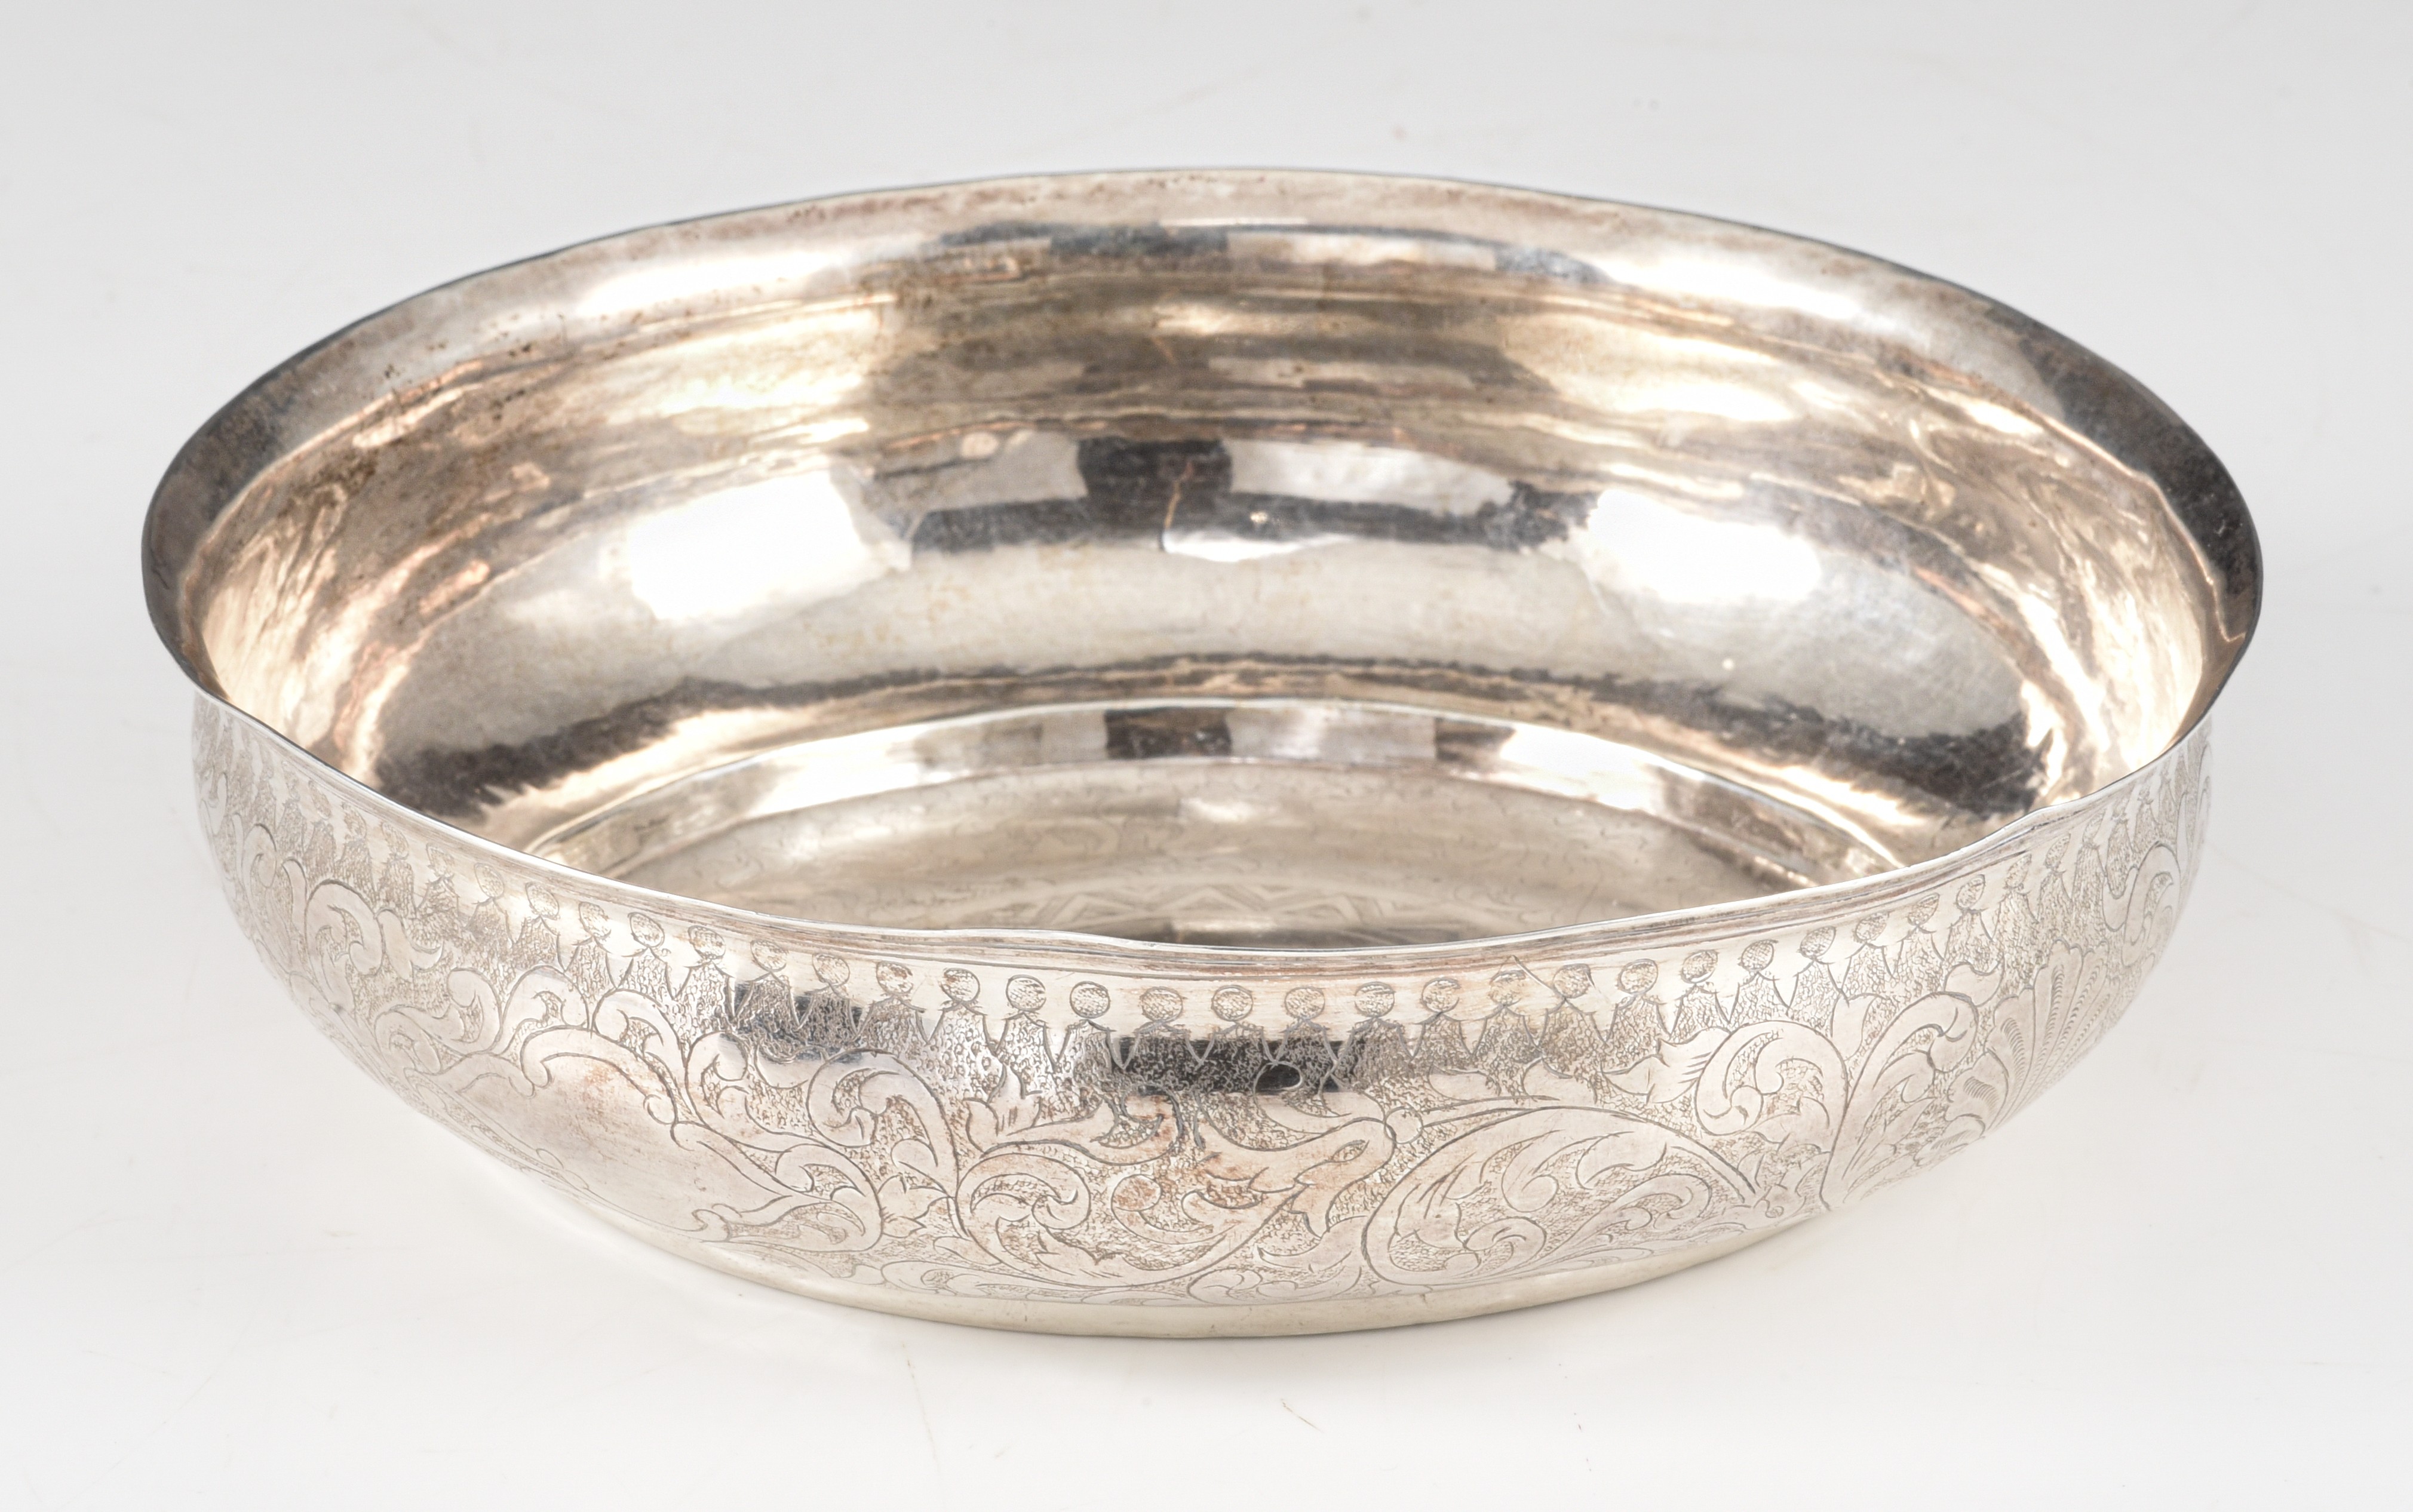 An Ottoman silver 'hammam' bowl with incised scroll decoration, 18th/19thC, H 5 - ¯ 19 cm - weight: - Image 2 of 5